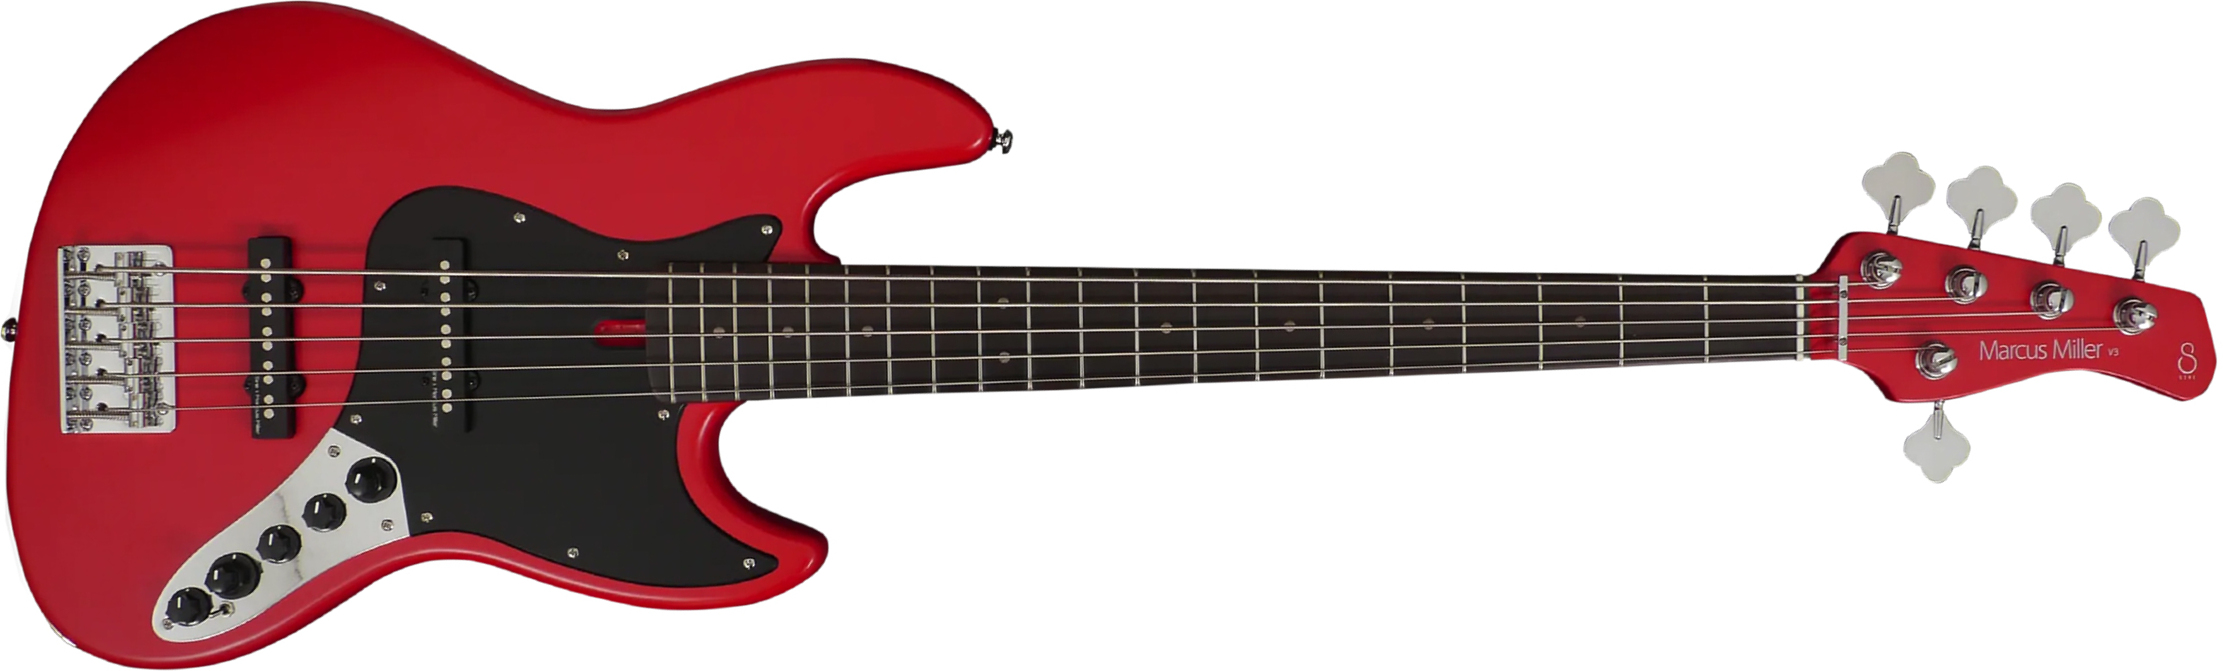 Marcus Miller V3 5st 2nd Generation 5c Active Rw Sans Housse - Red Satin - Solidbody E-bass - Main picture